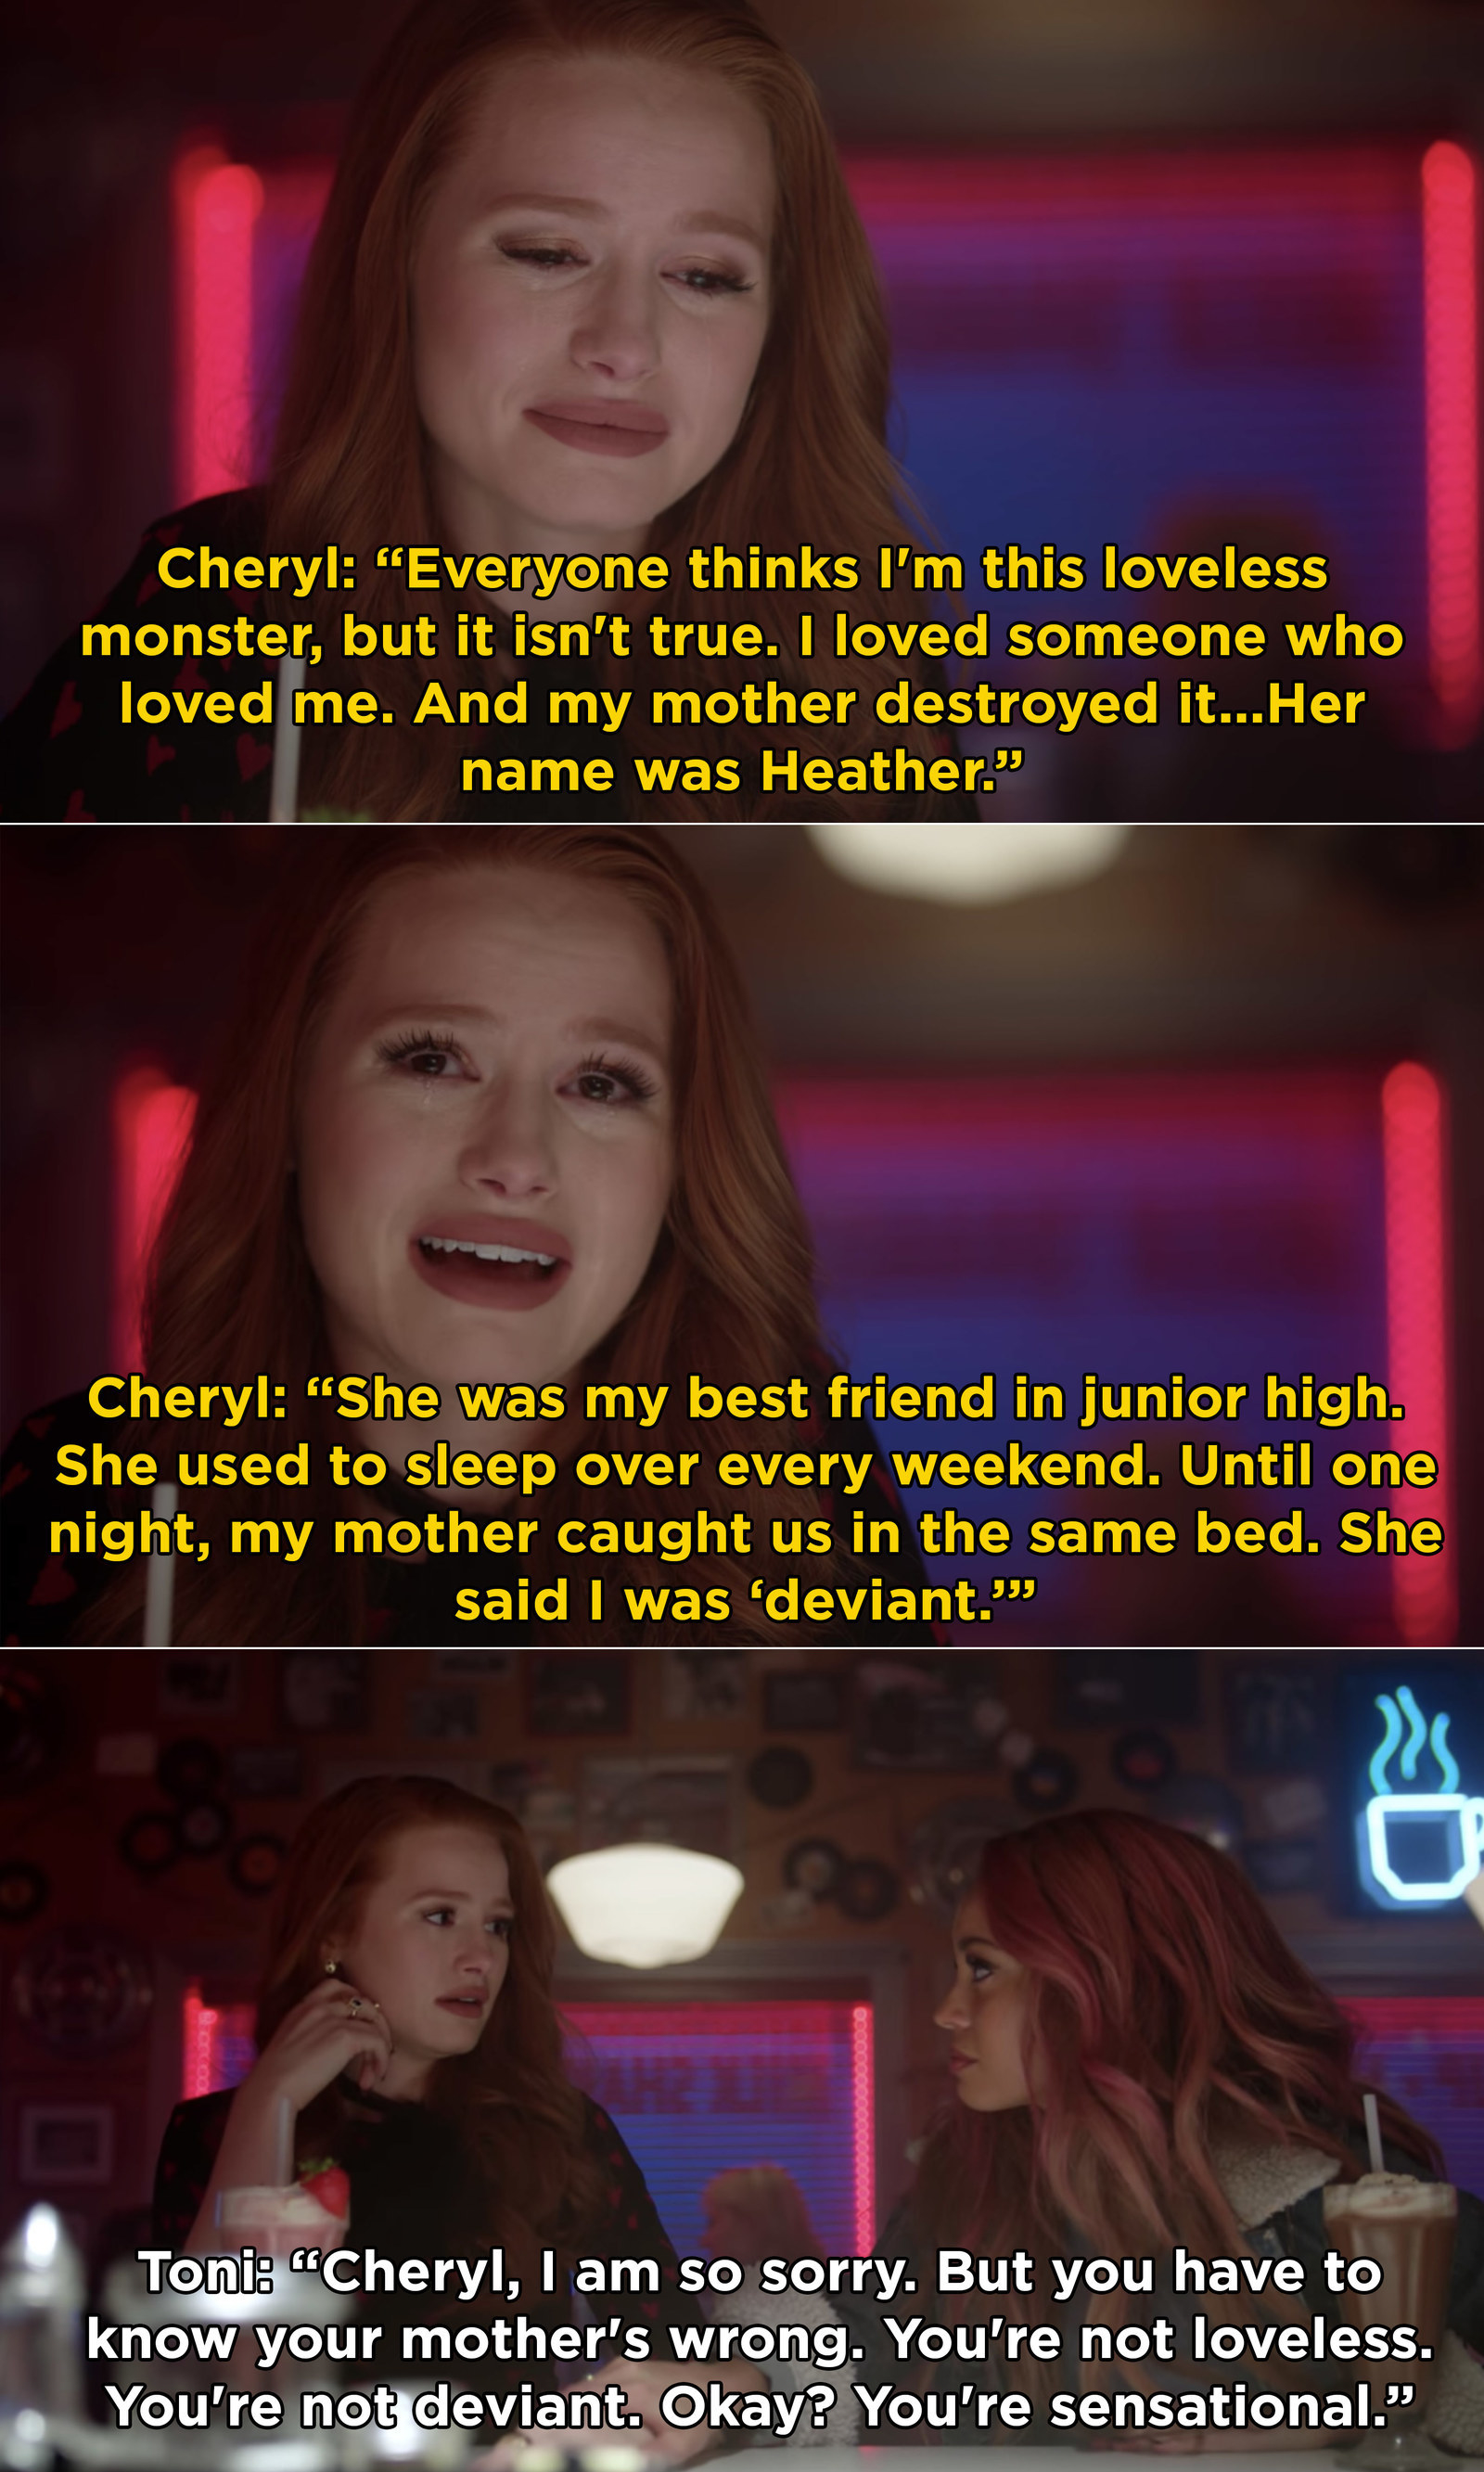 Cheryl says her mother thinks she&#x27;s a loveless monster, Toni: &quot;Cheryl I am so sorry, but you have to know your mother&#x27;s wrong. You&#x27;re not loveless, you&#x27;re not deviant. You&#x27;re sensational.&quot;